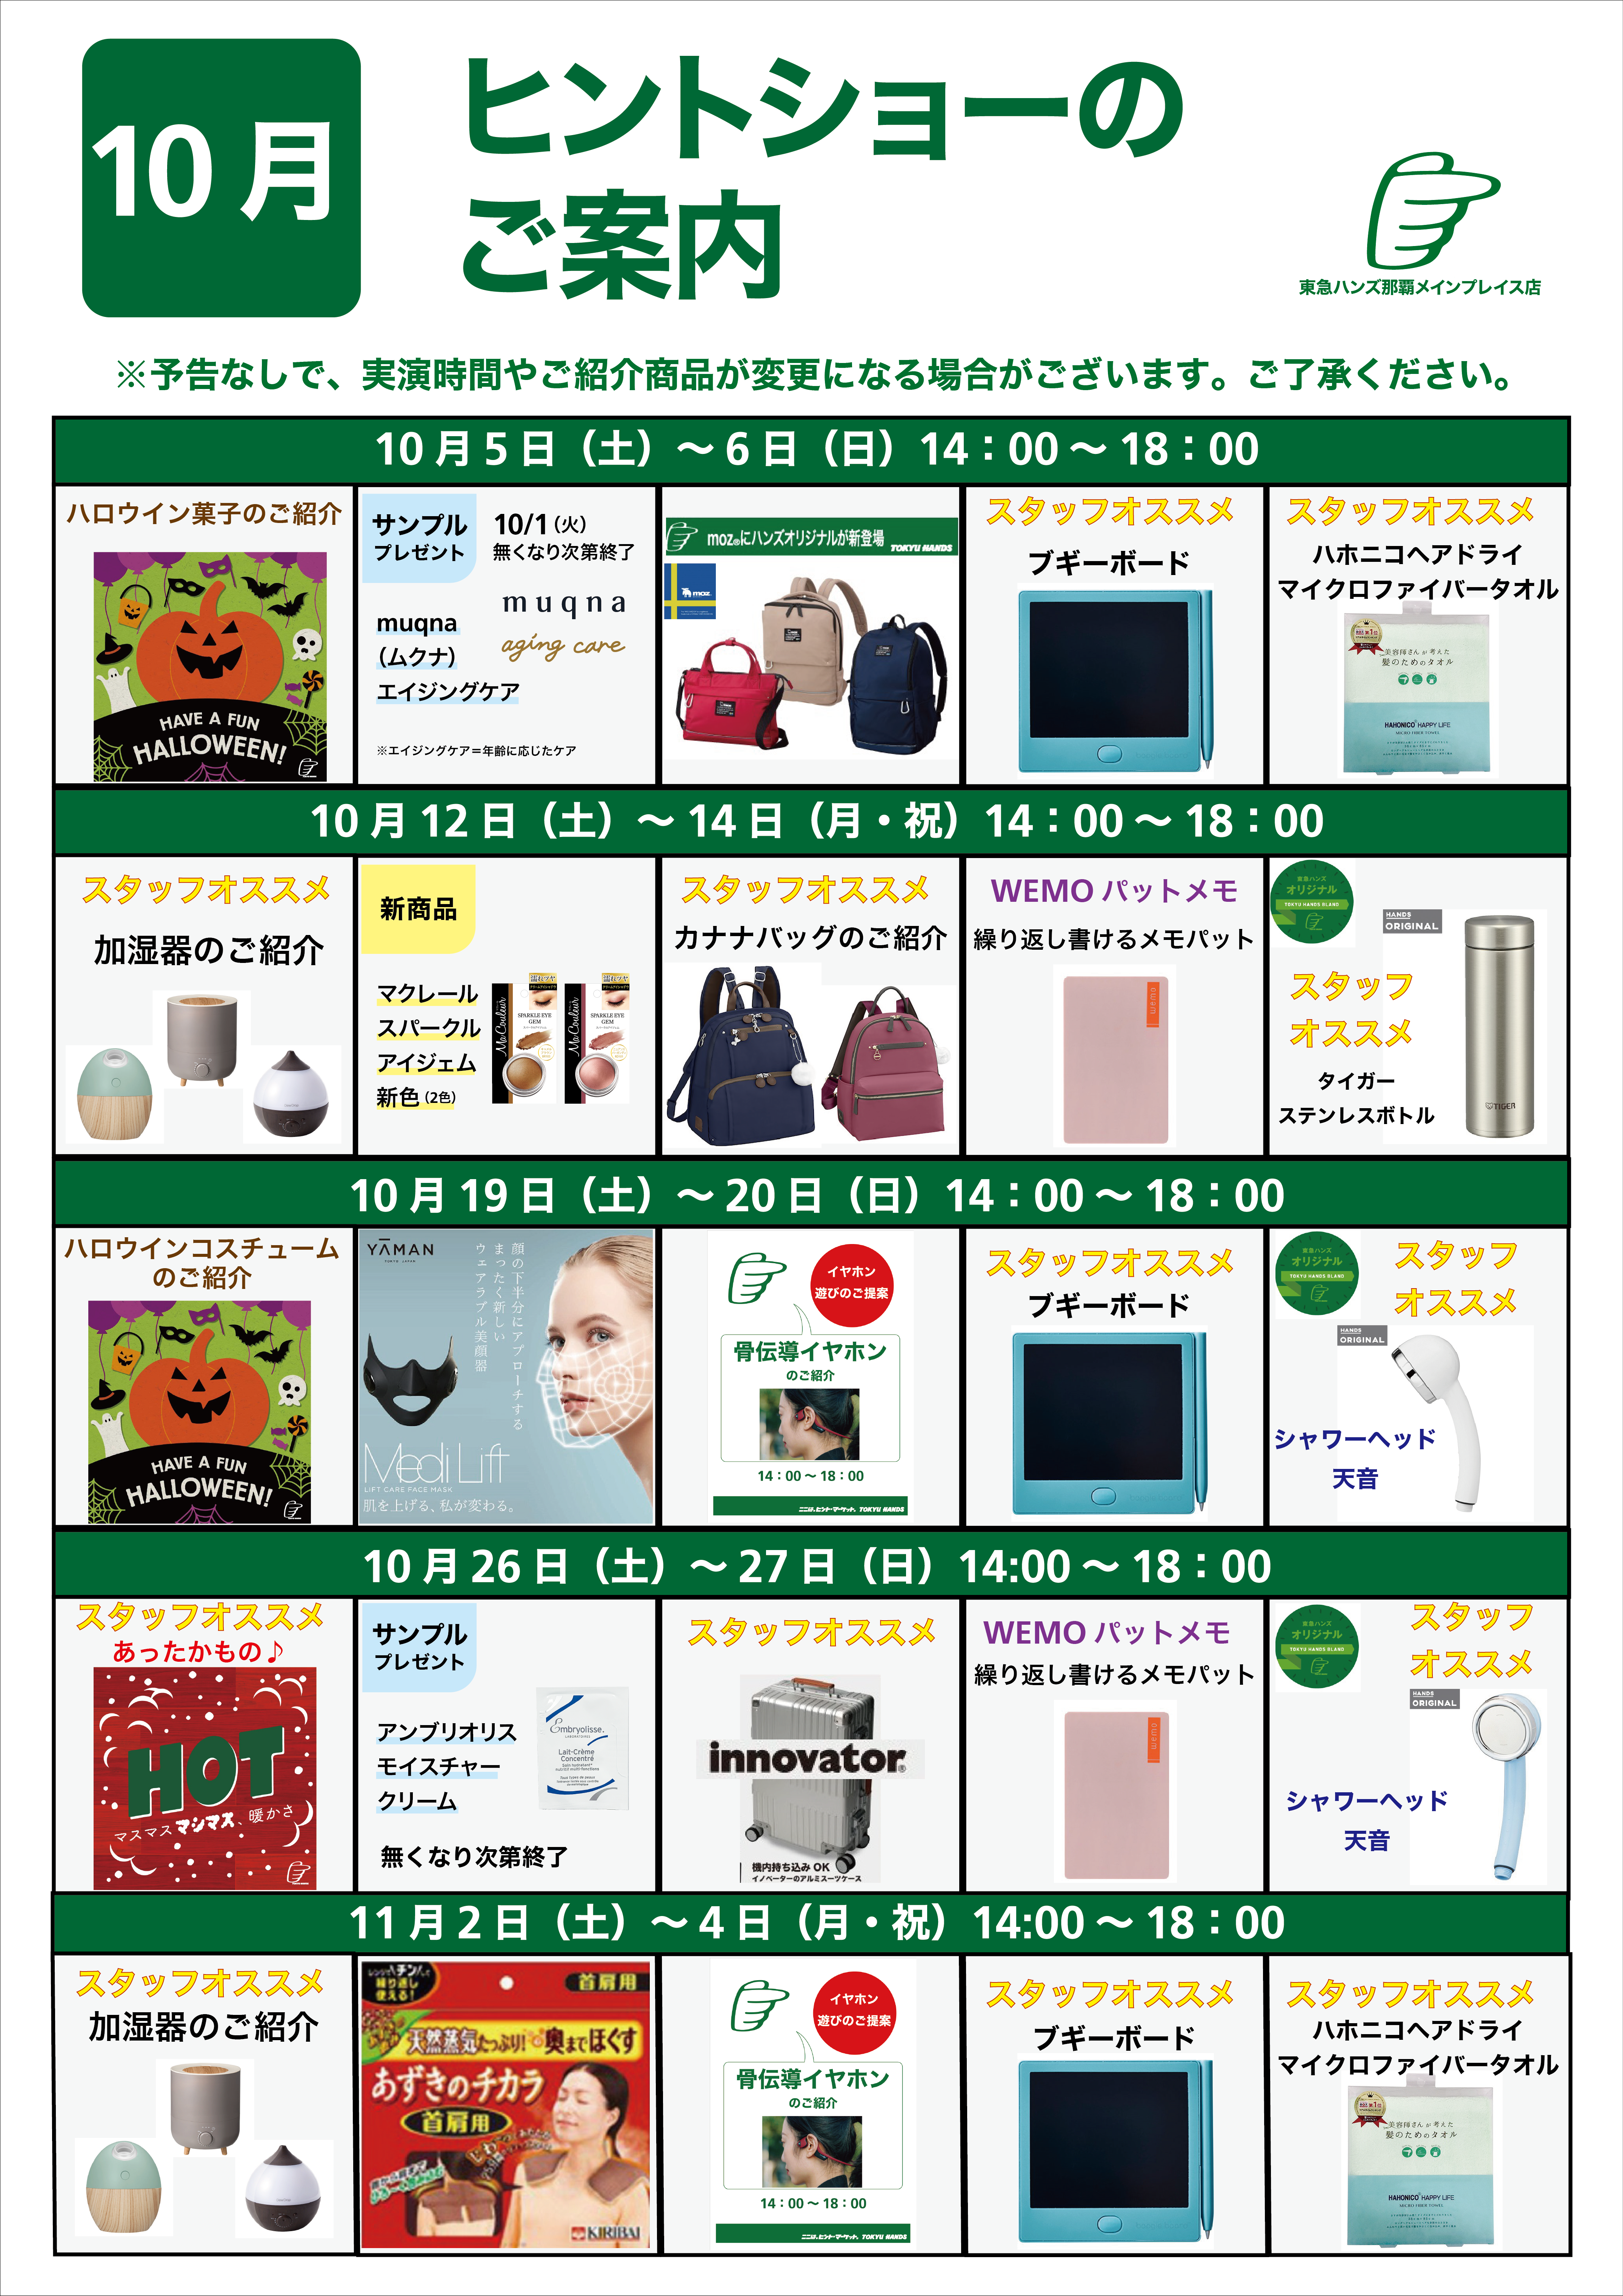 https://naha.tokyu-hands.co.jp/item/275be41f39c7d21a148b8ac1129849d14e08c2be.png